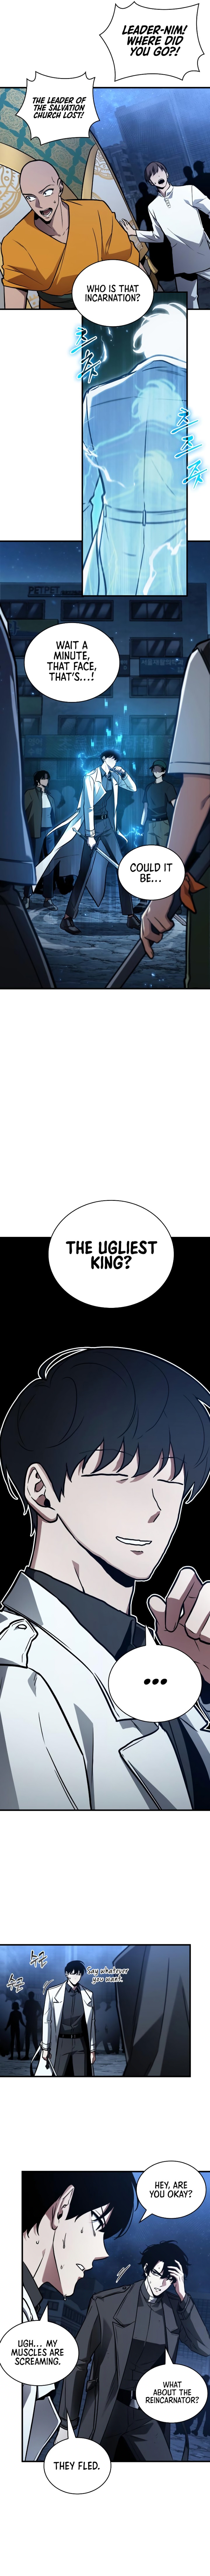 Omniscient Reader's Viewpoint - Chapter 152 Page 12